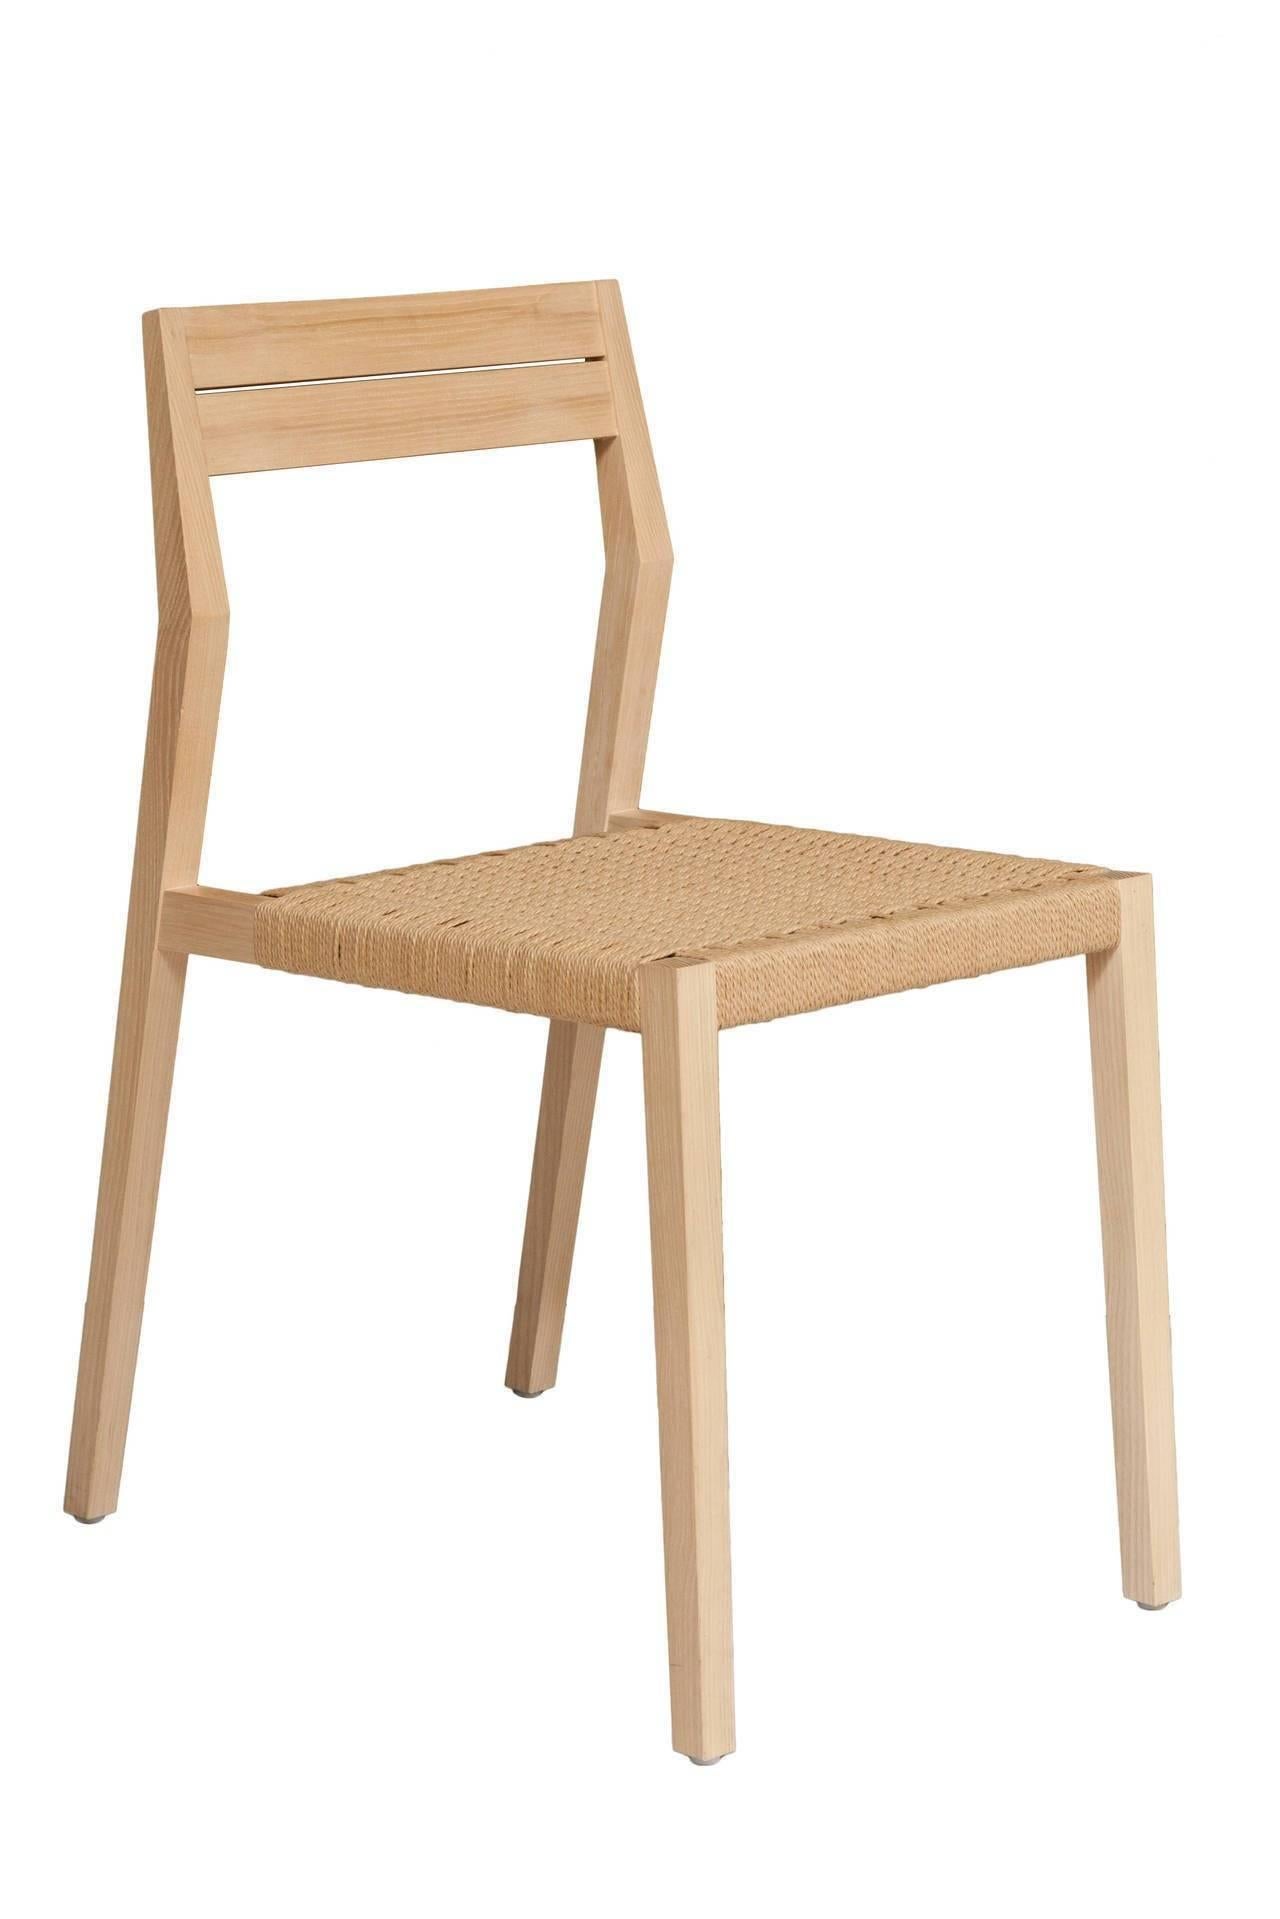 Stillmade Dining Chairs In Excellent Condition For Sale In New York, NY